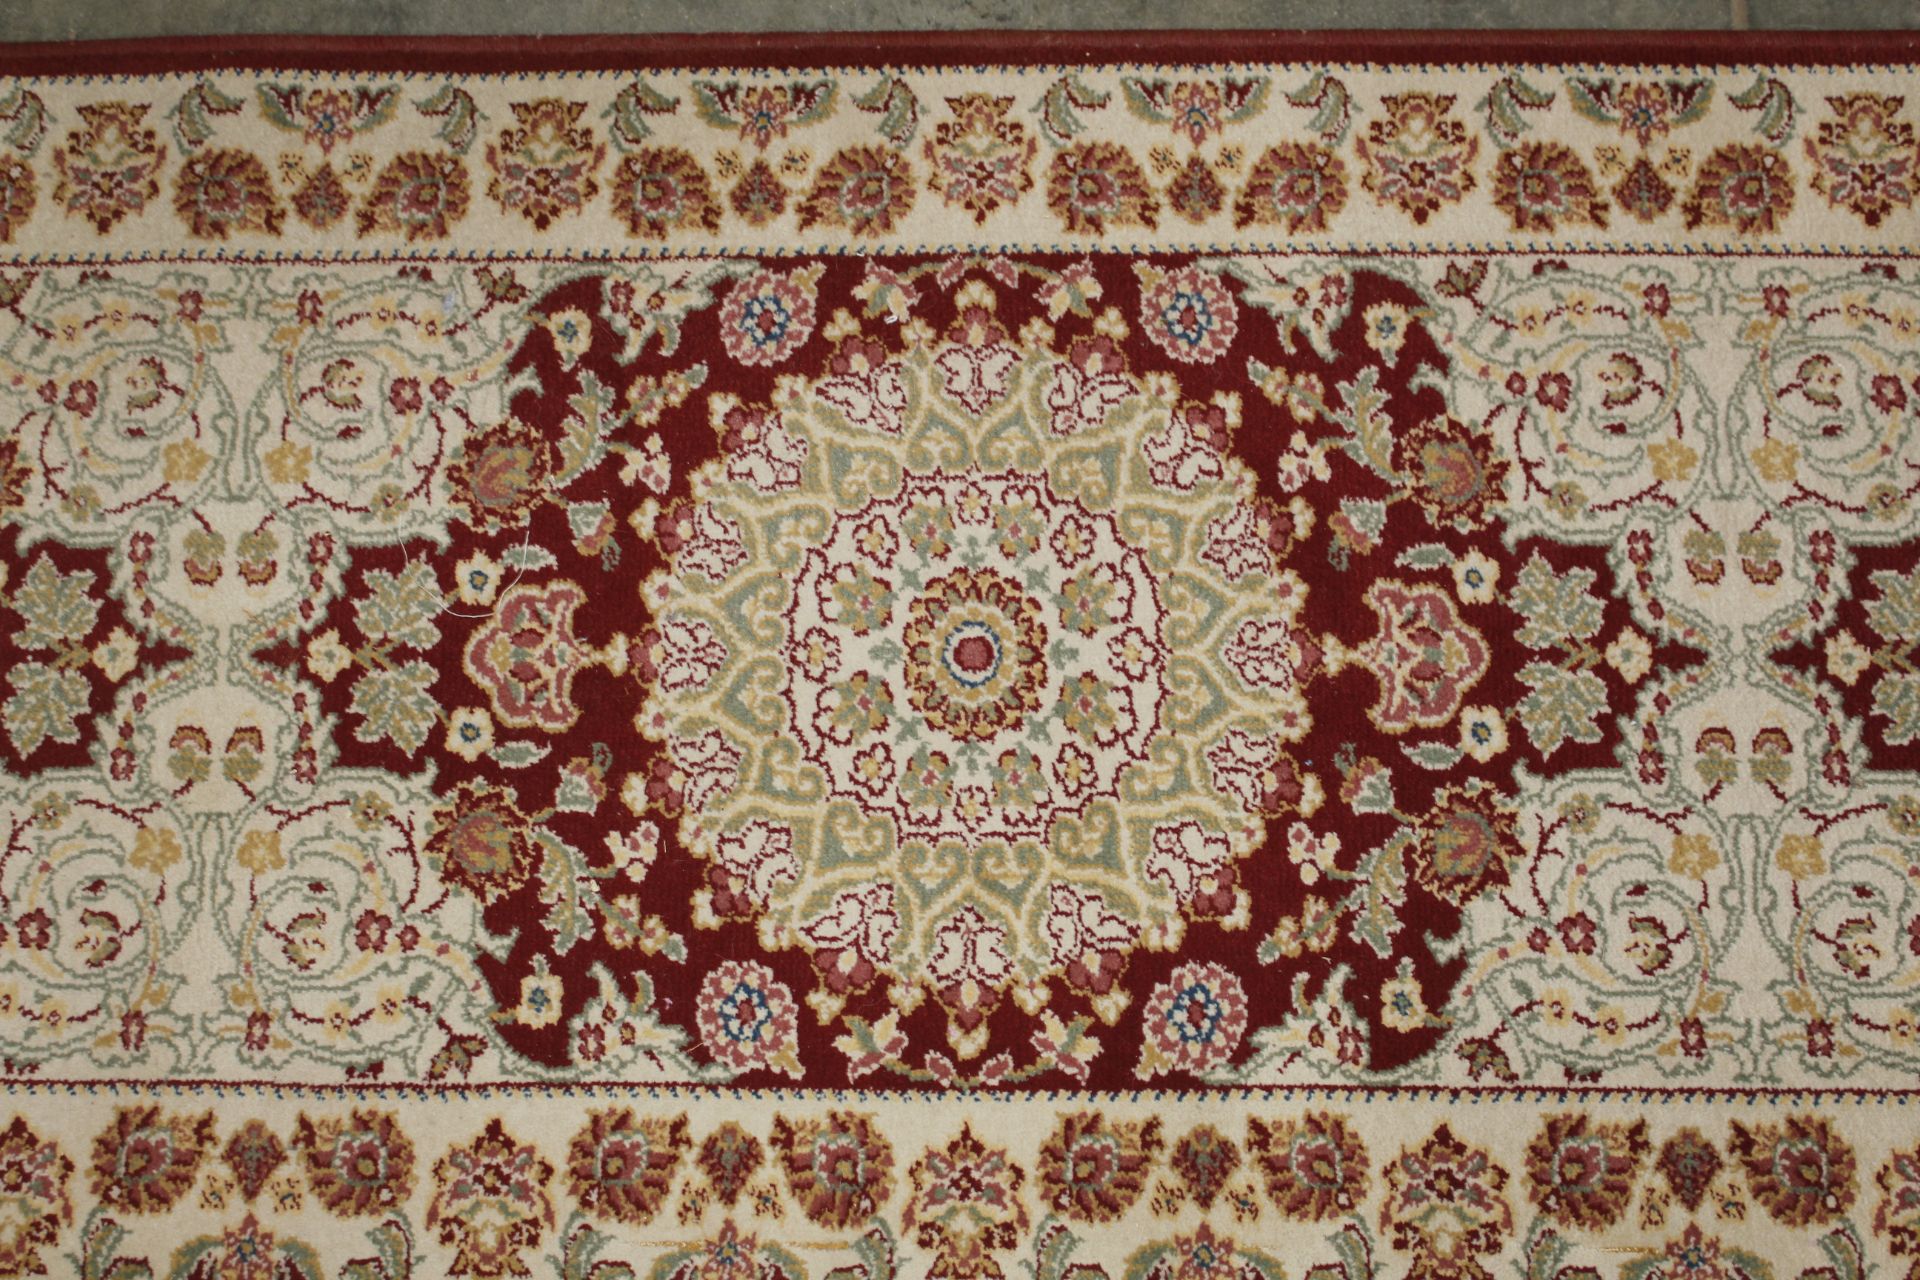 An approx. 8'4" x 2'3" floral patterned rug - Image 2 of 5